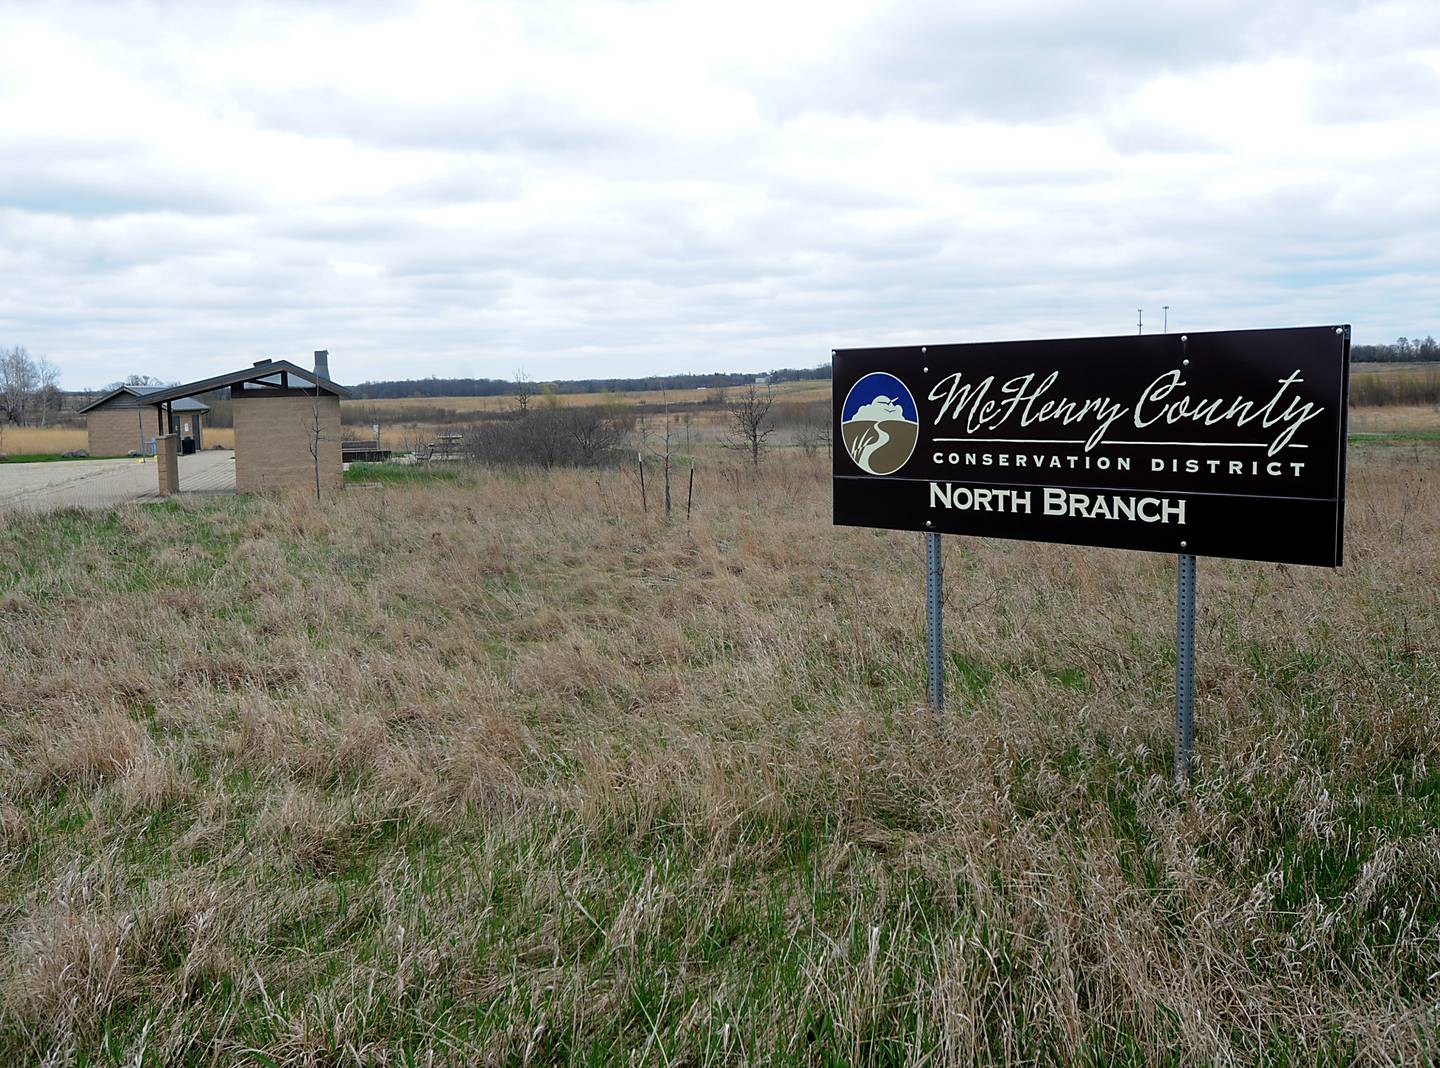 The McHenry County Conservation District’s North Branch Conservation Area at 11500 North Keystone Road in Richmond on Monday, May 2, 2022. A body was found near the entrance to the conservation area on Friday, April 29.